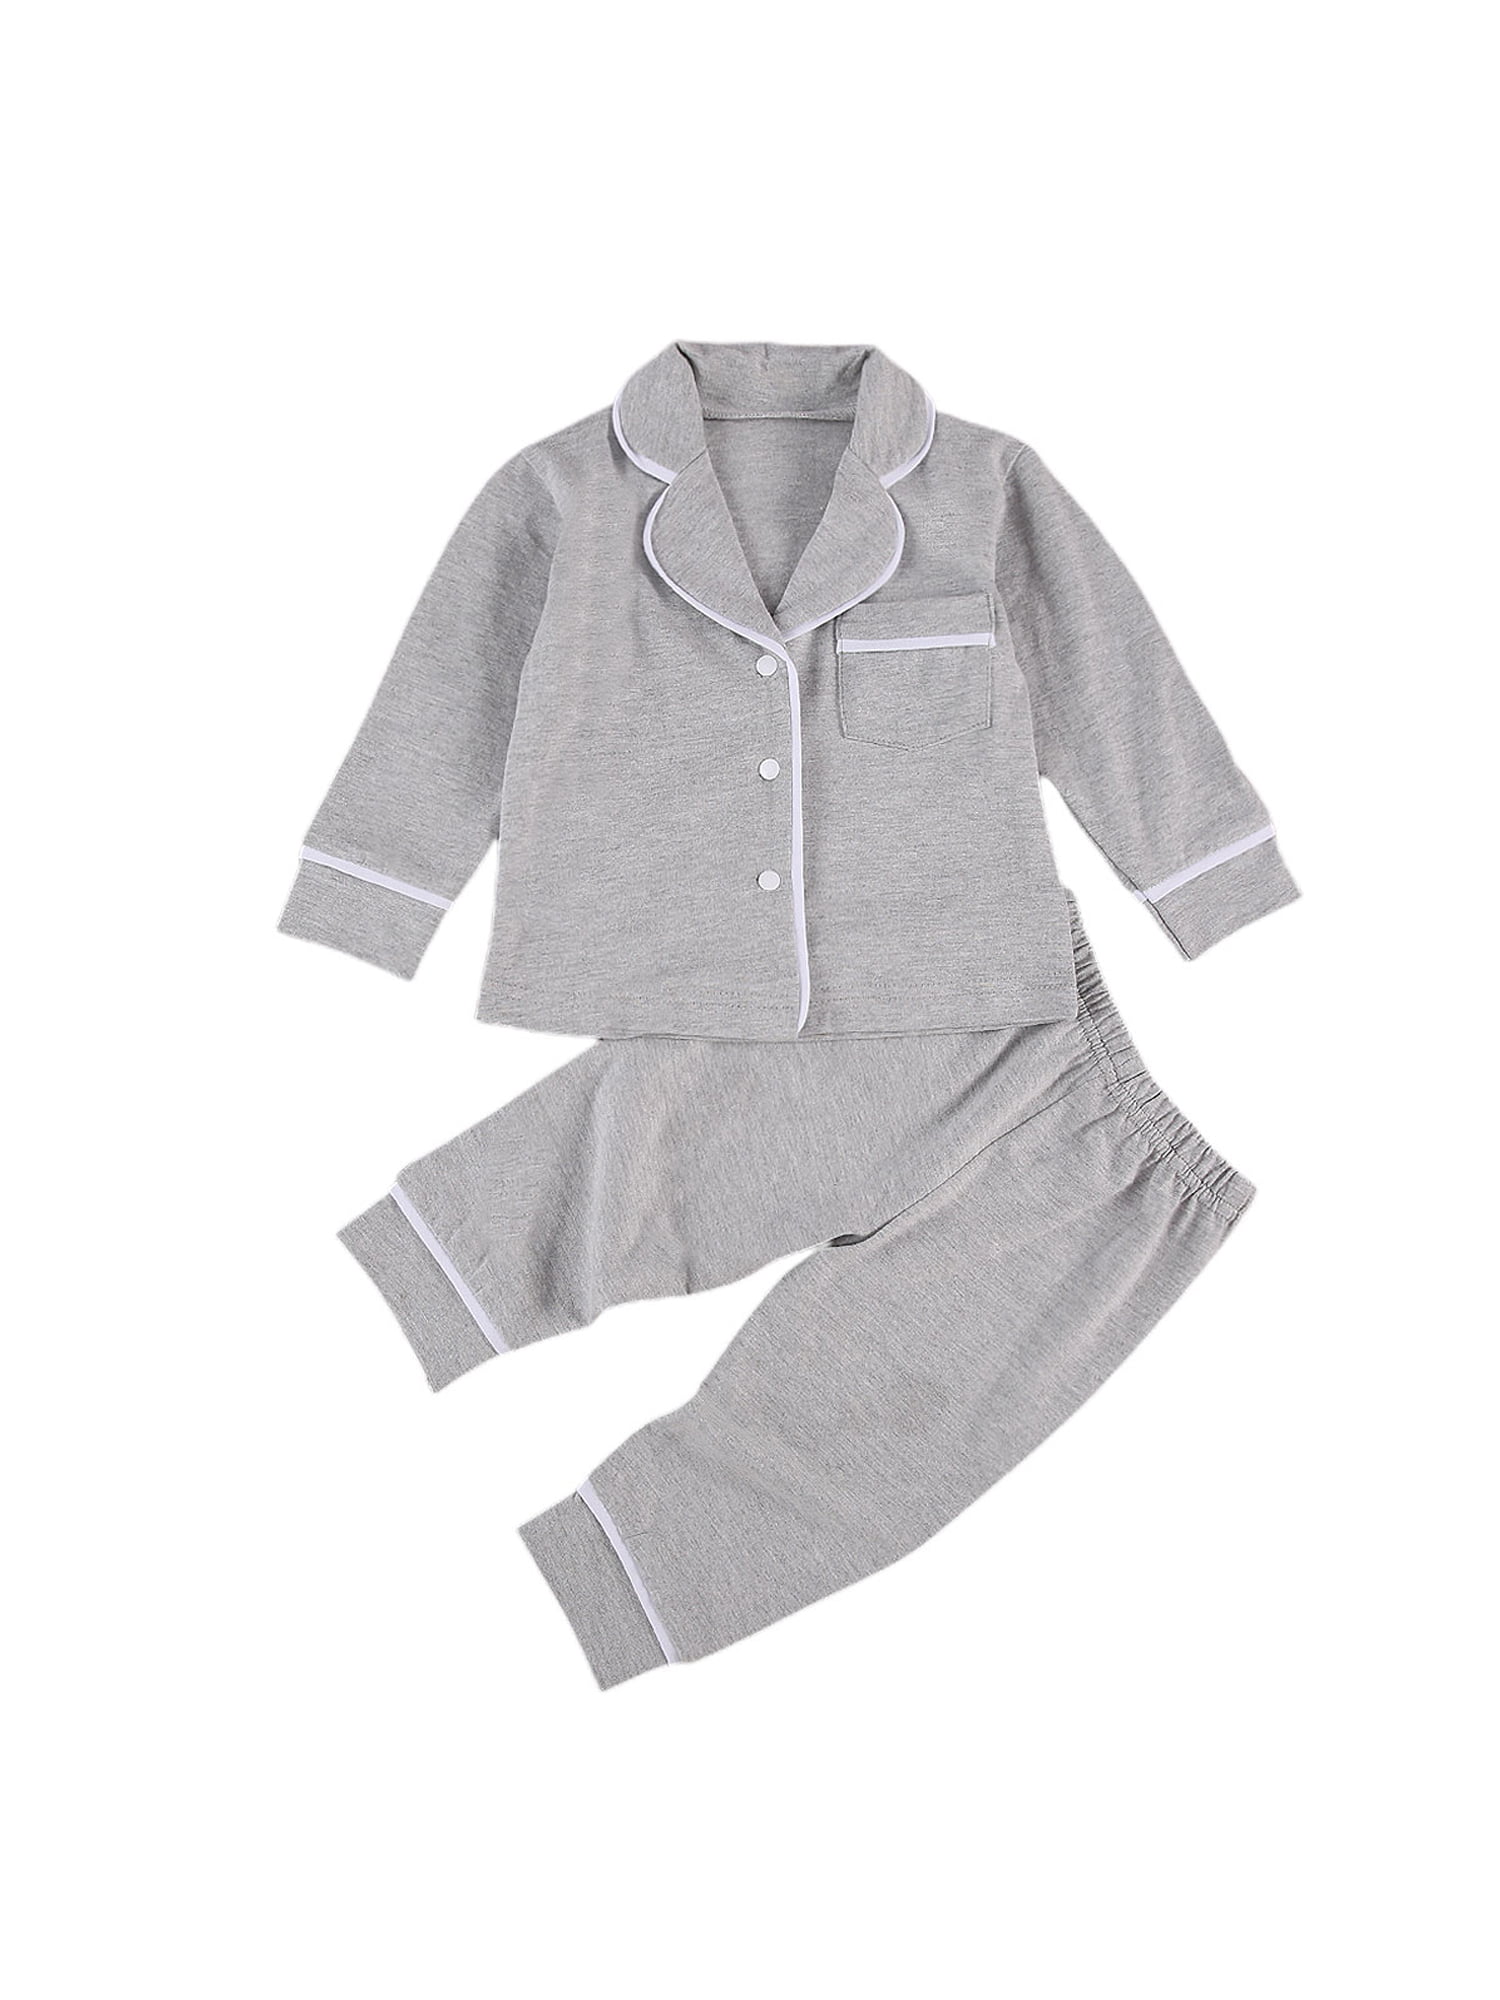 Details about   Super Soft Pink Cozy Coveralls Blanket Sleeper One Piece Pajamas Women L 14/16 